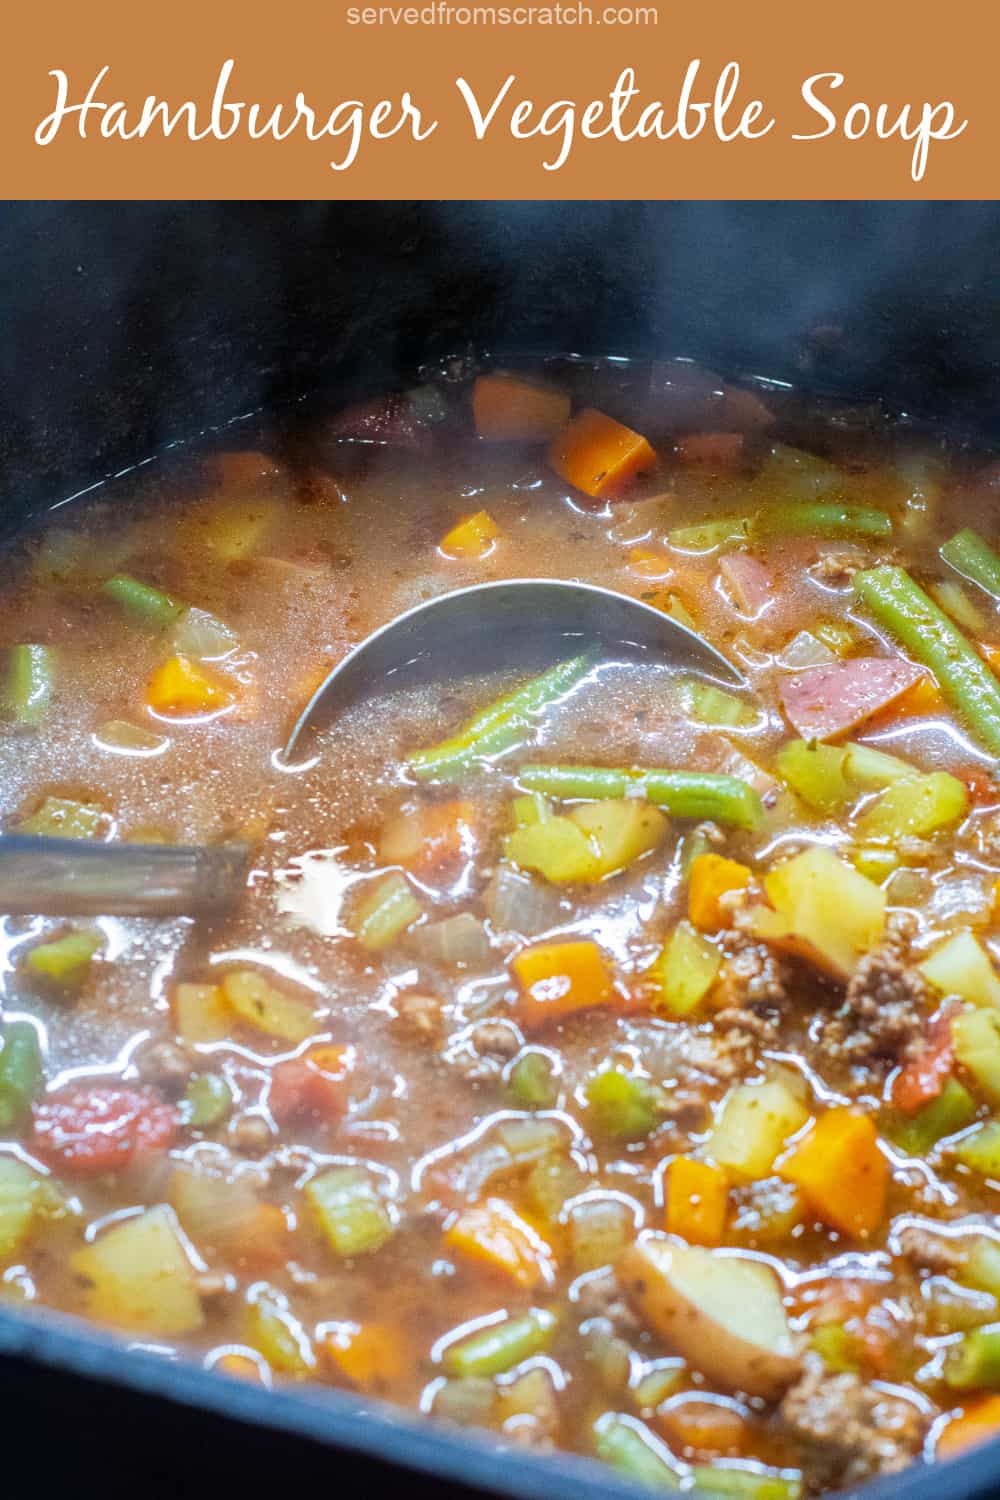 Hamburger Vegetable Soup - Served From Scratch